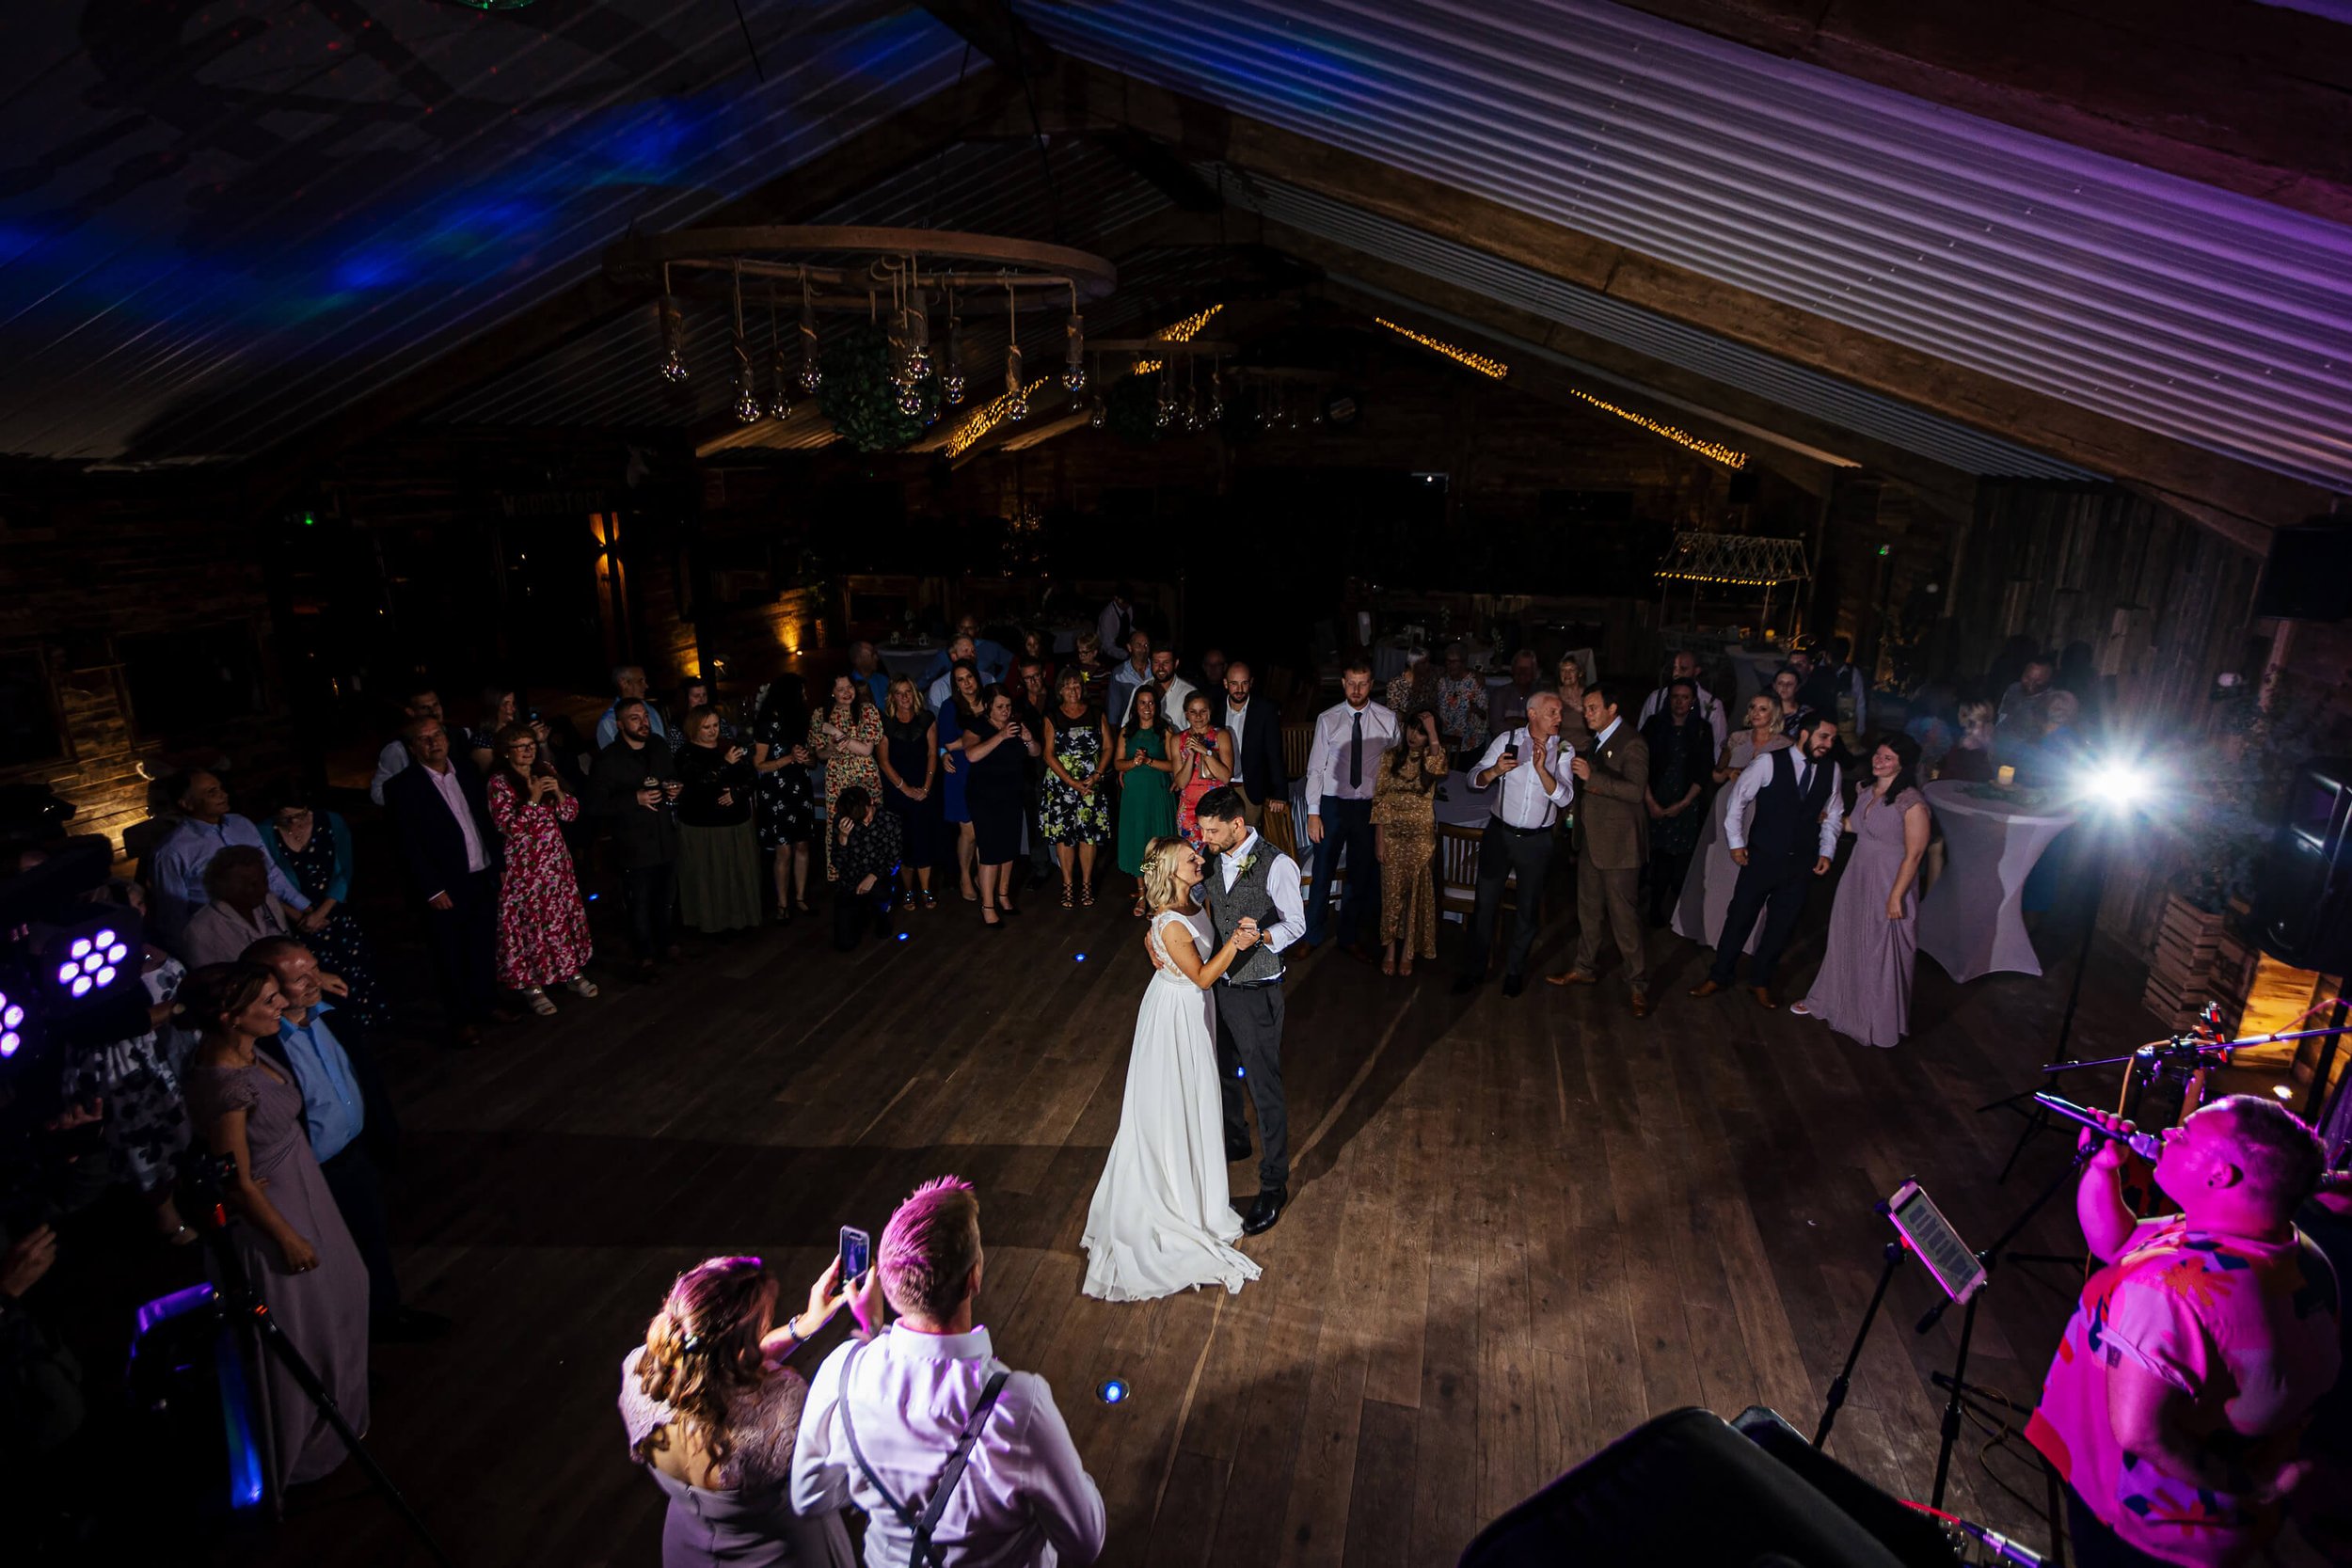 First dance as man and wife at a wedding